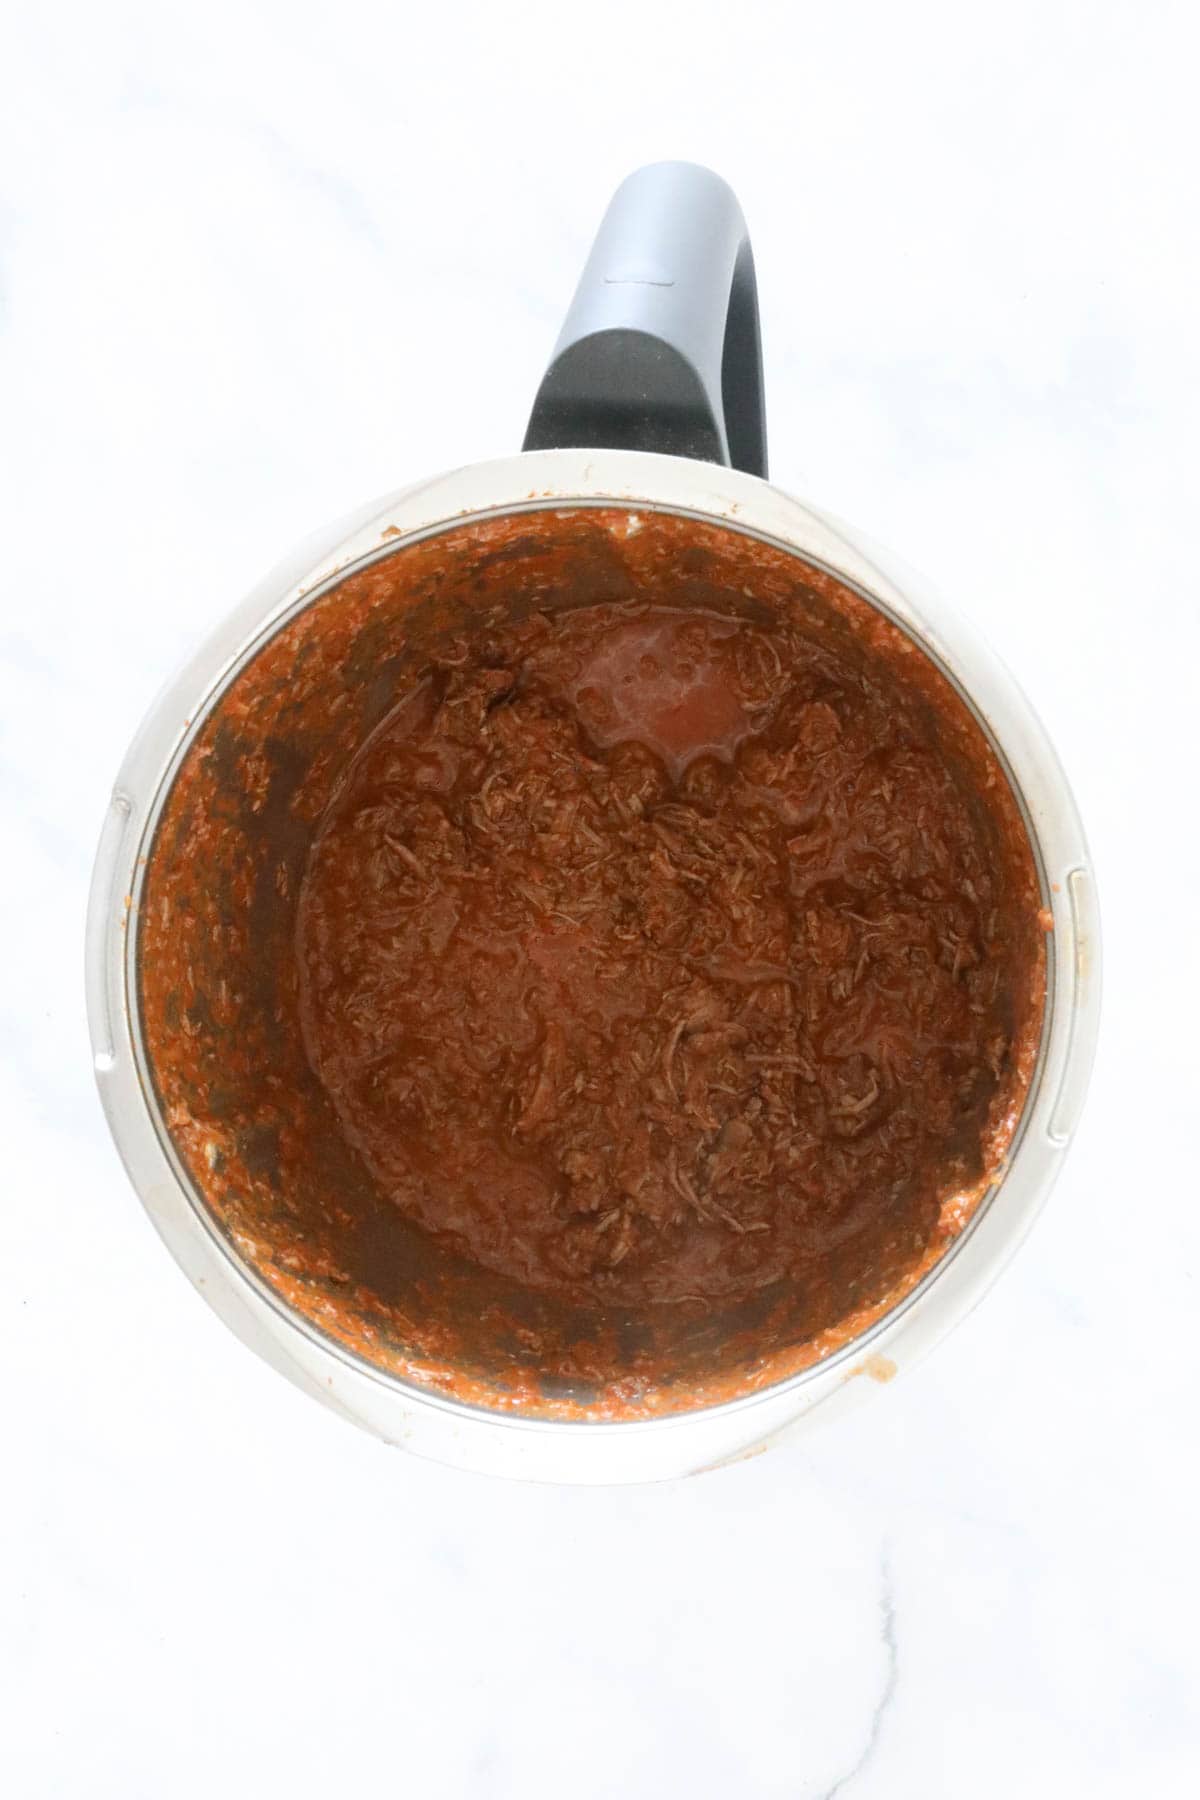 Shredded beef in a Thermomix.